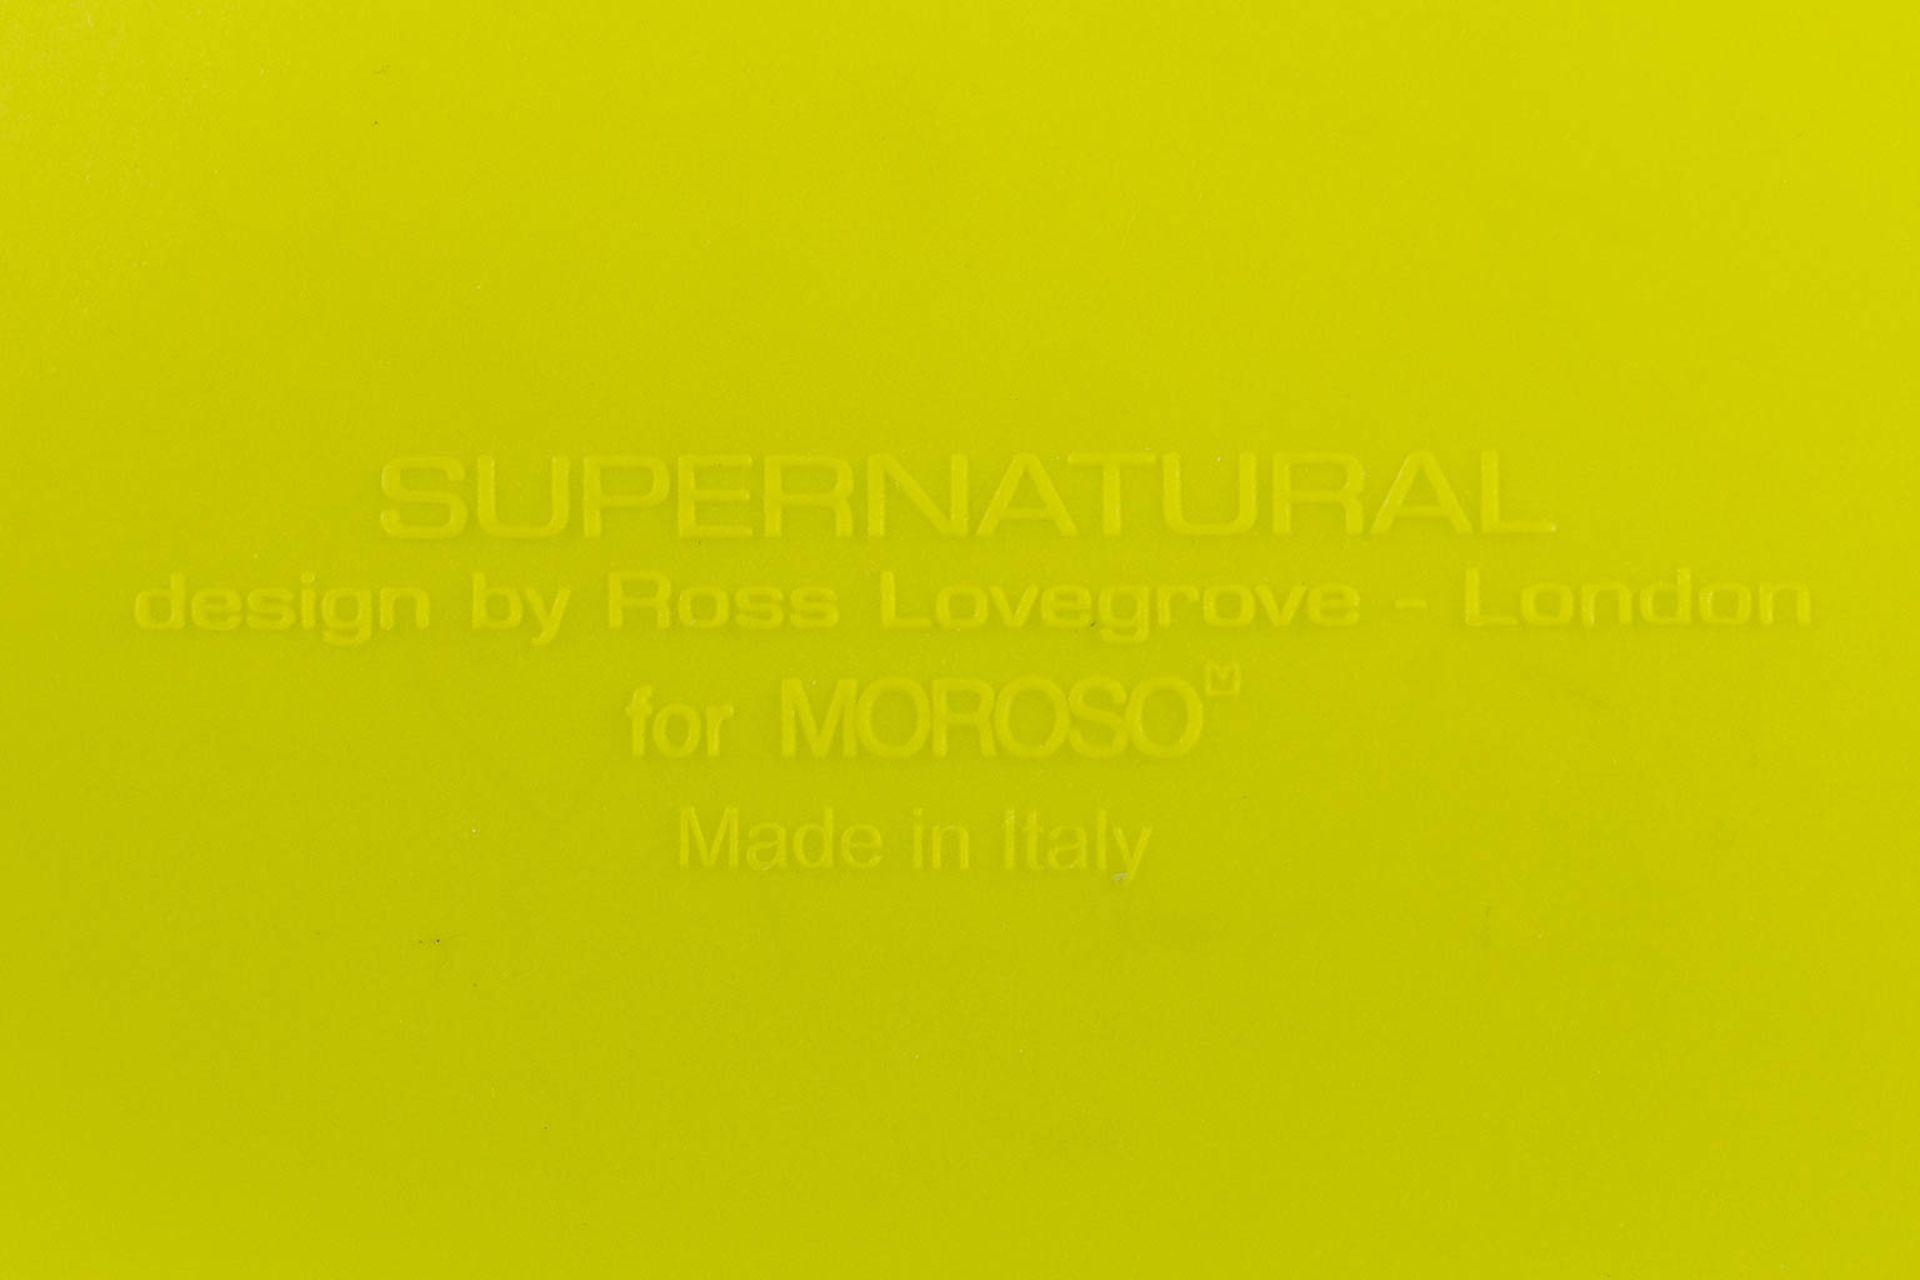 Ross LOVEGROVE (1958) 'Supernatural Chairs' (2005) for Morosso, Italy. (L:48 x W:48 x H:82 cm) - Image 8 of 11